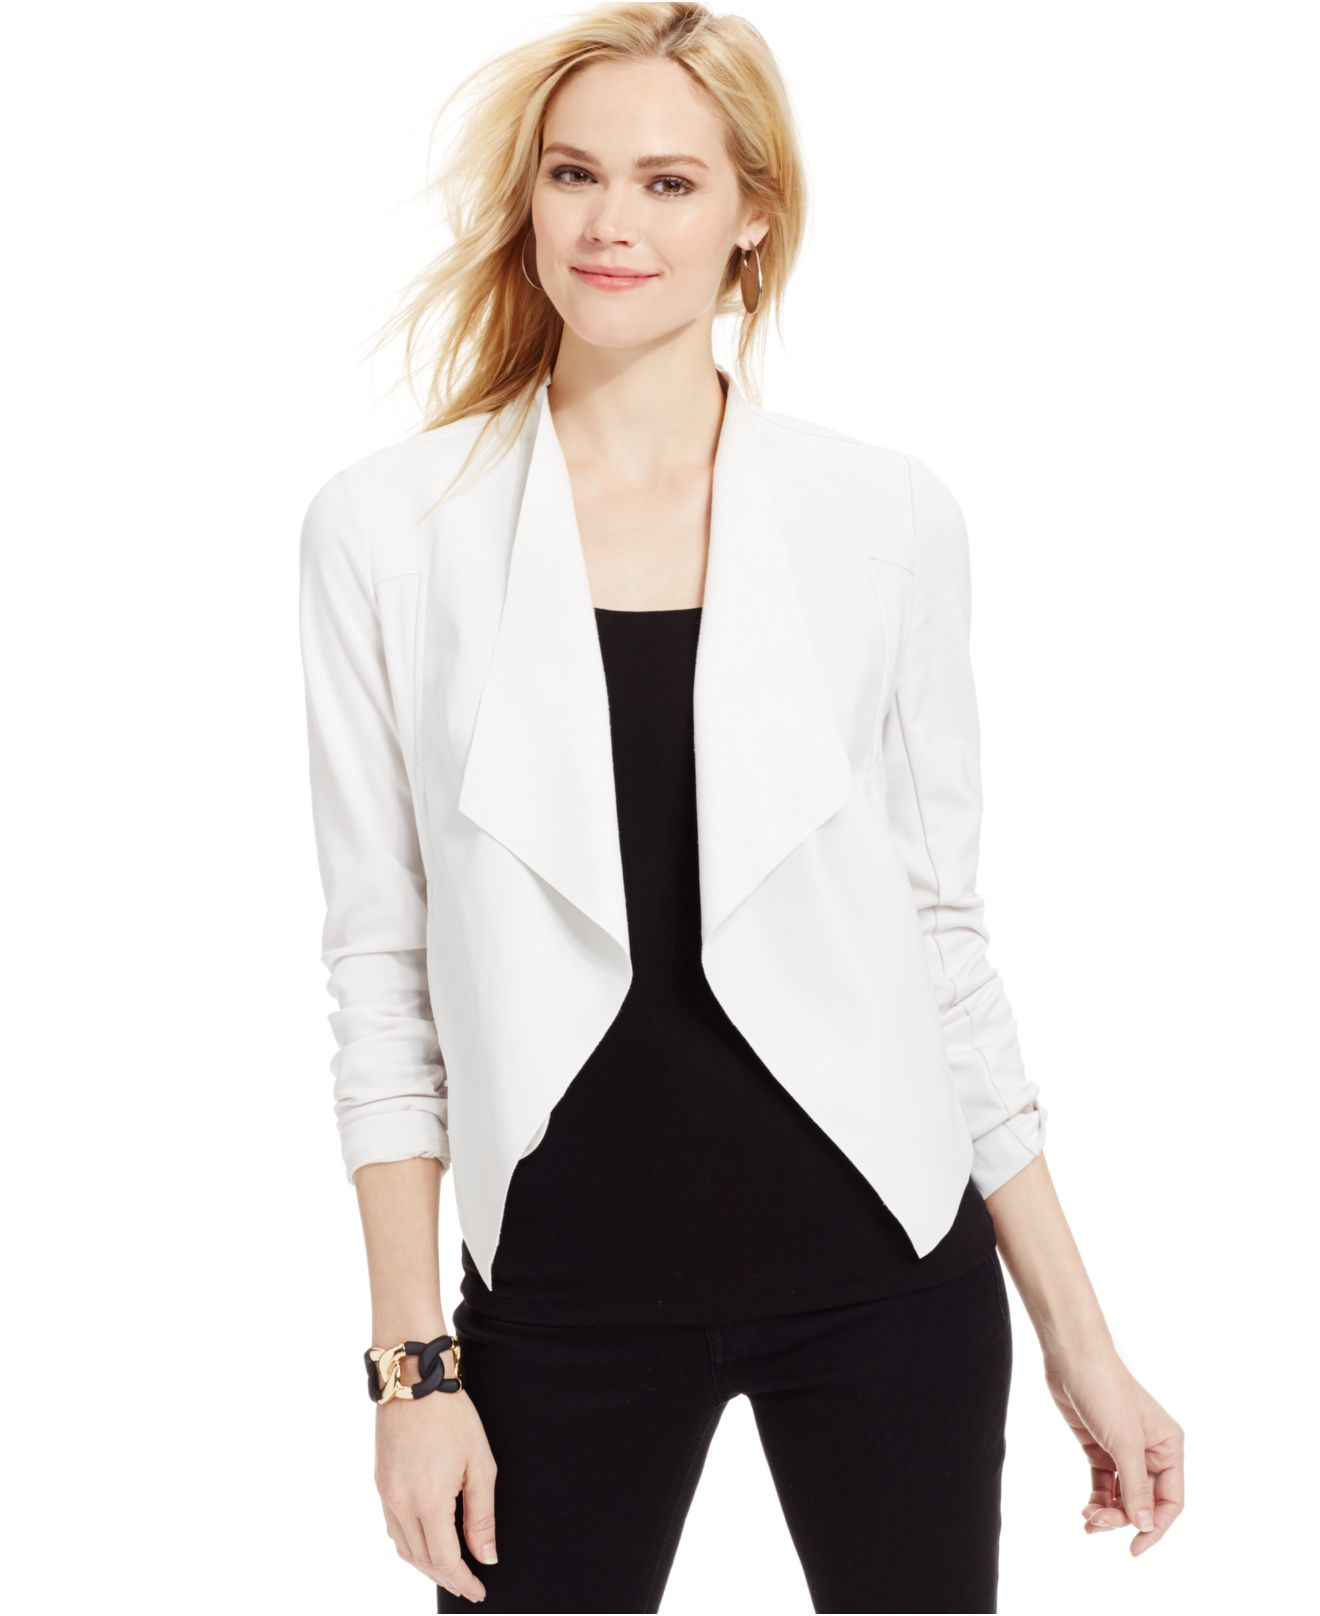 Lyst - Kut From The Kloth Faux-Leather Draped Jacket in White